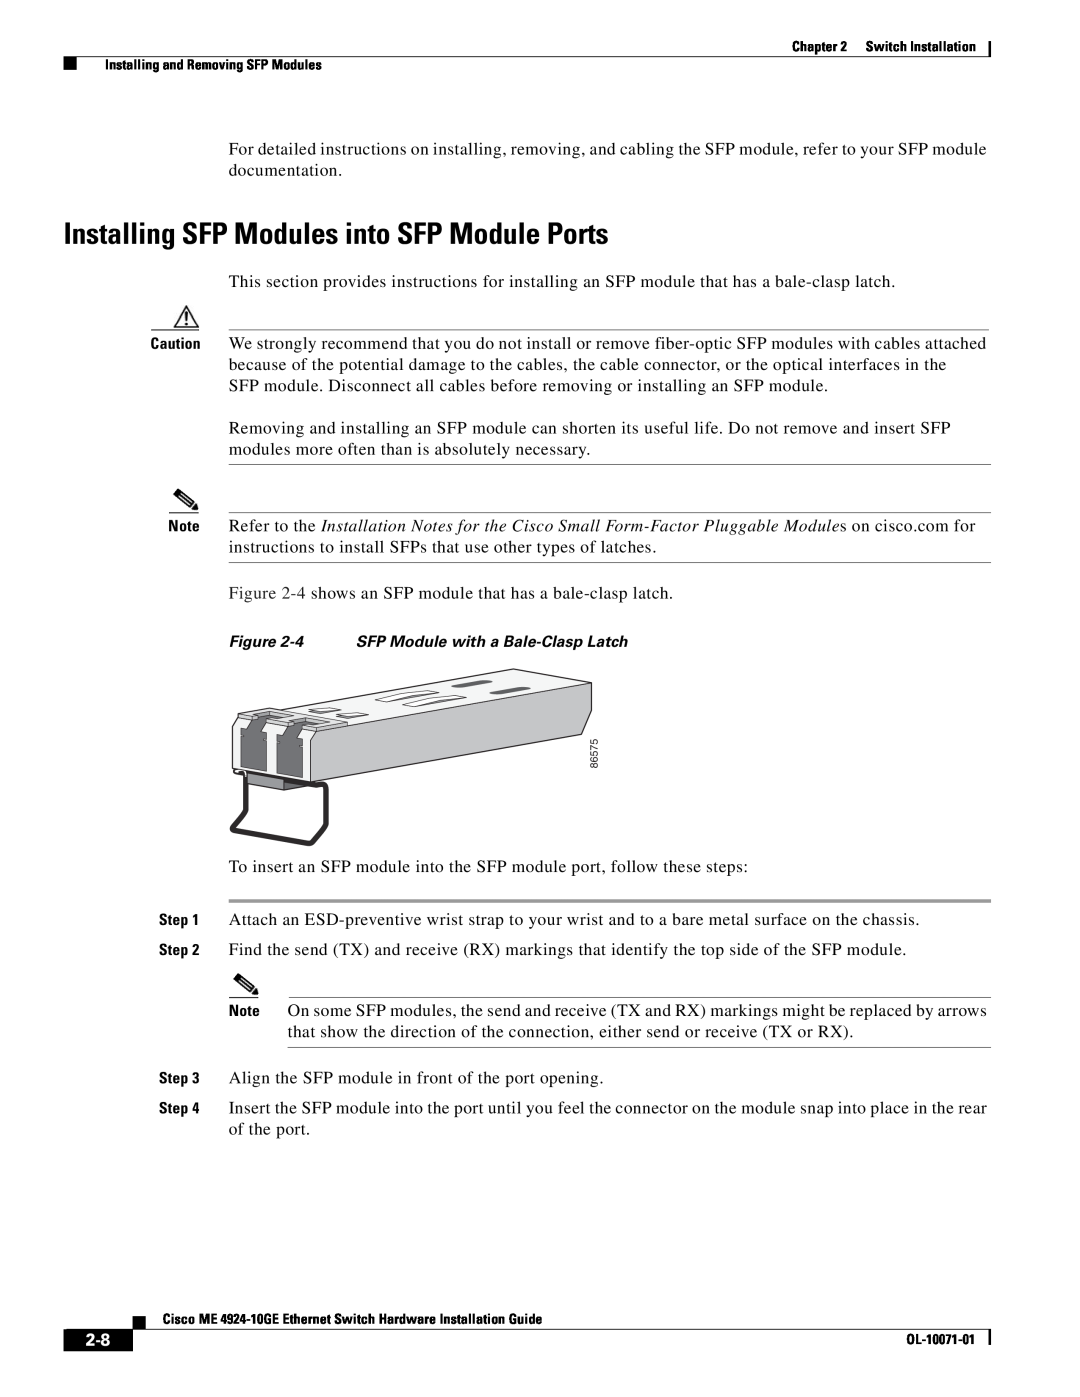 Cisco Systems ME 4924-10GE manual Installing SFP Modules into SFP Module Ports 